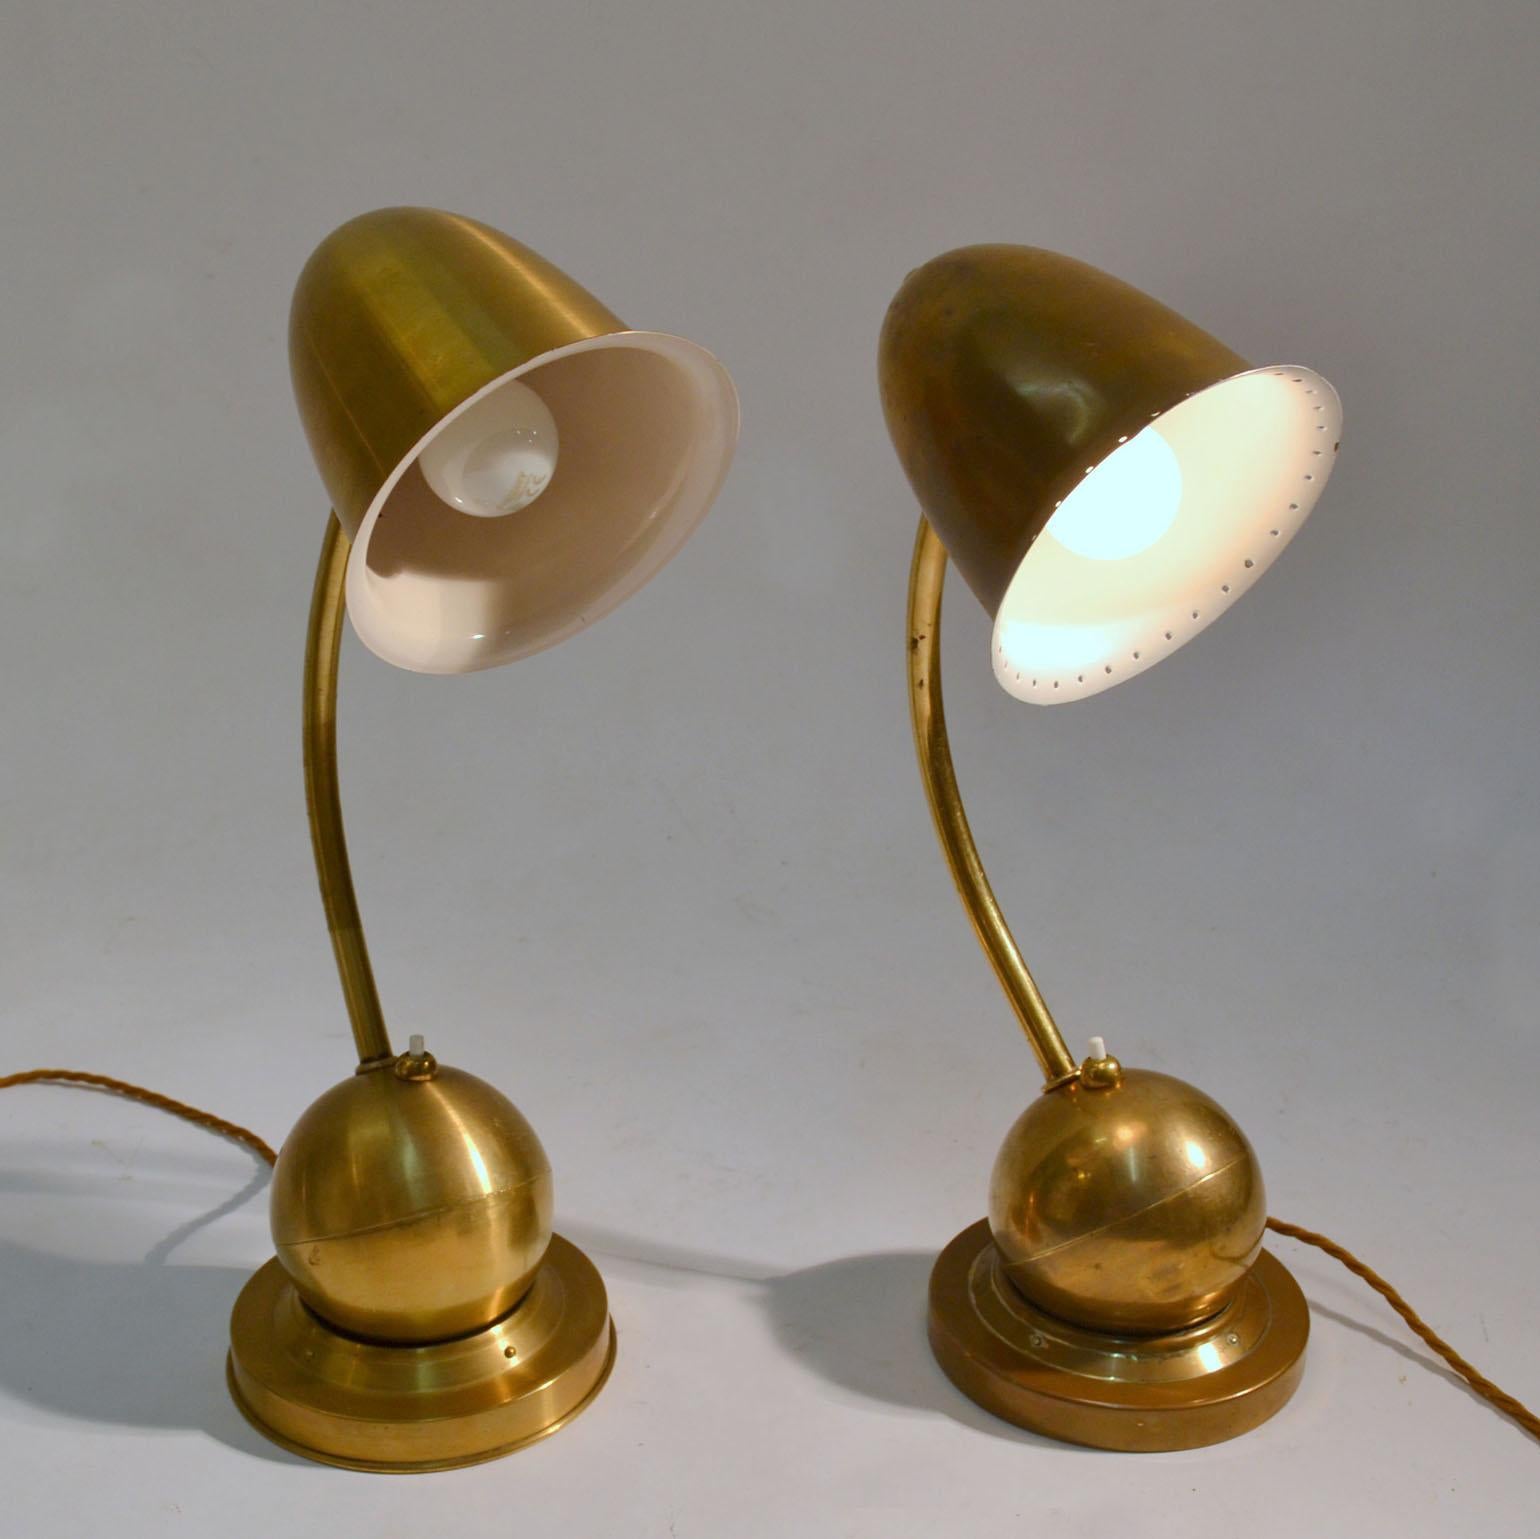 Mid-17th Century Pair of Modernist Brass Table / Desk Lamps 1930s Lamps by Daalderop Netherlands